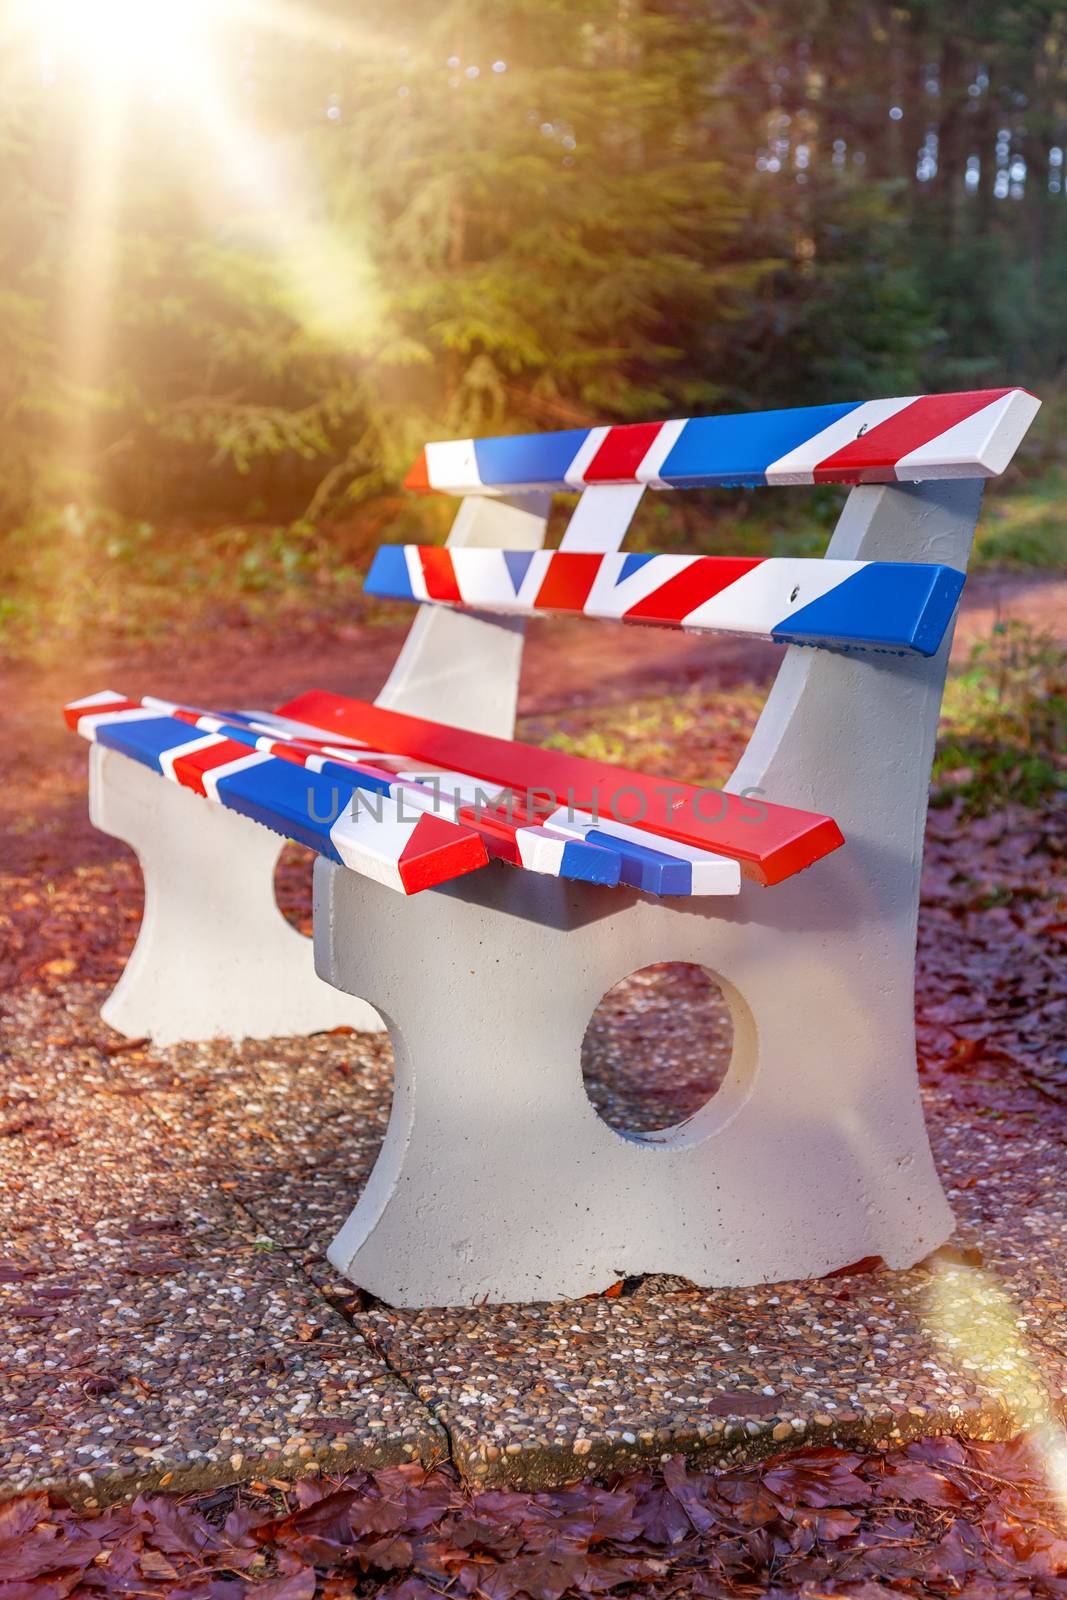 An image of a bench in Great Britain Union Jack flag colors